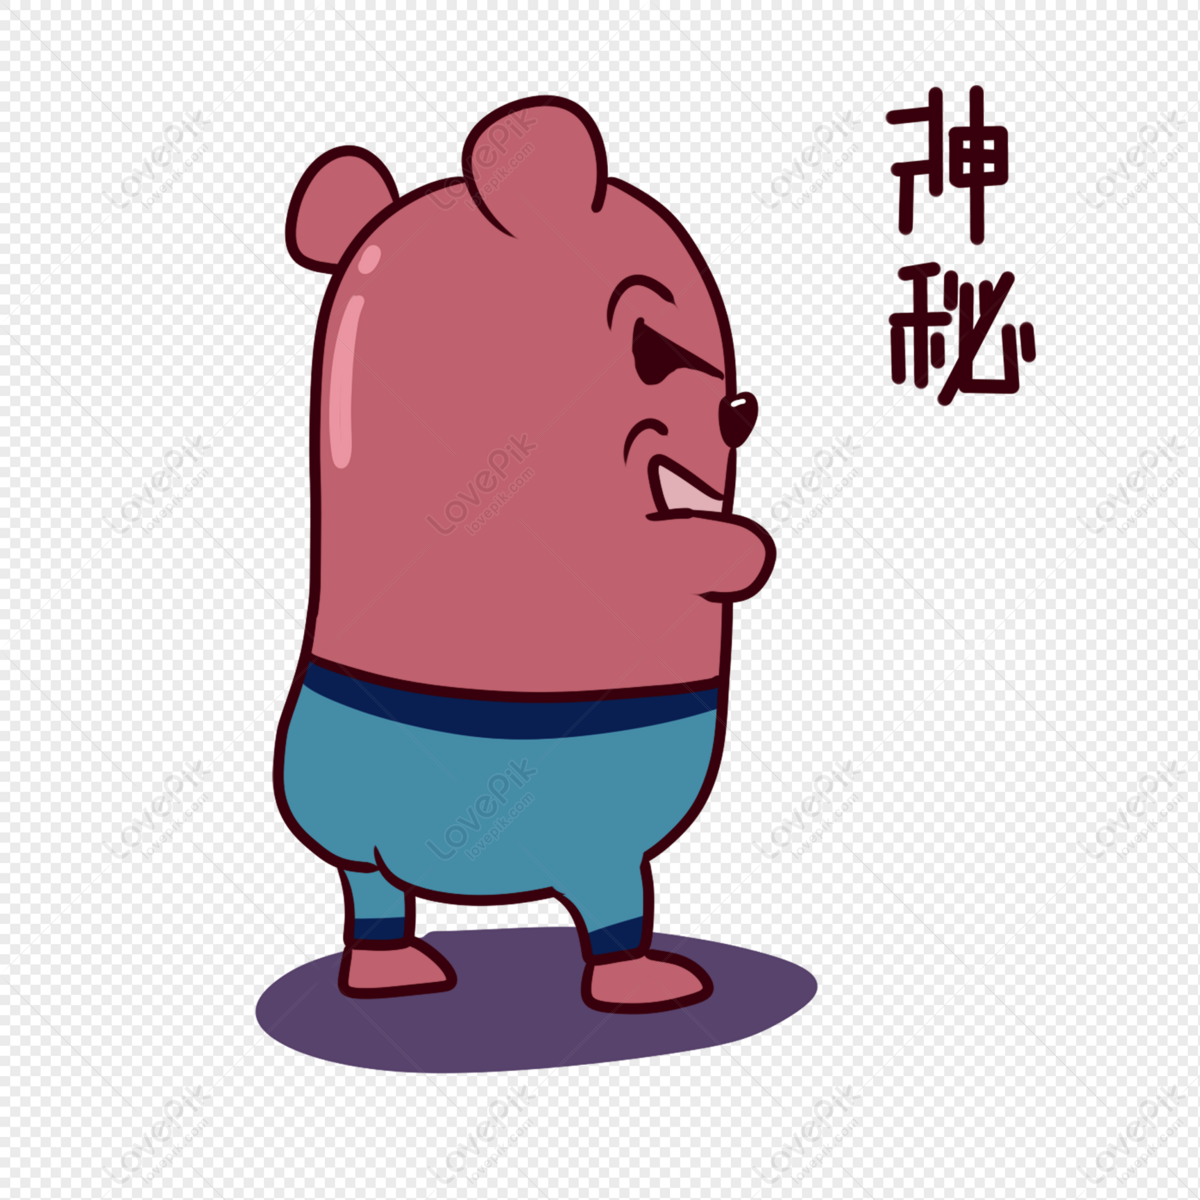 Sweet Potato Bear Cartoon Mystery Expression Pack PNG Picture And Clipart  Image For Free Download - Lovepik | 401158965